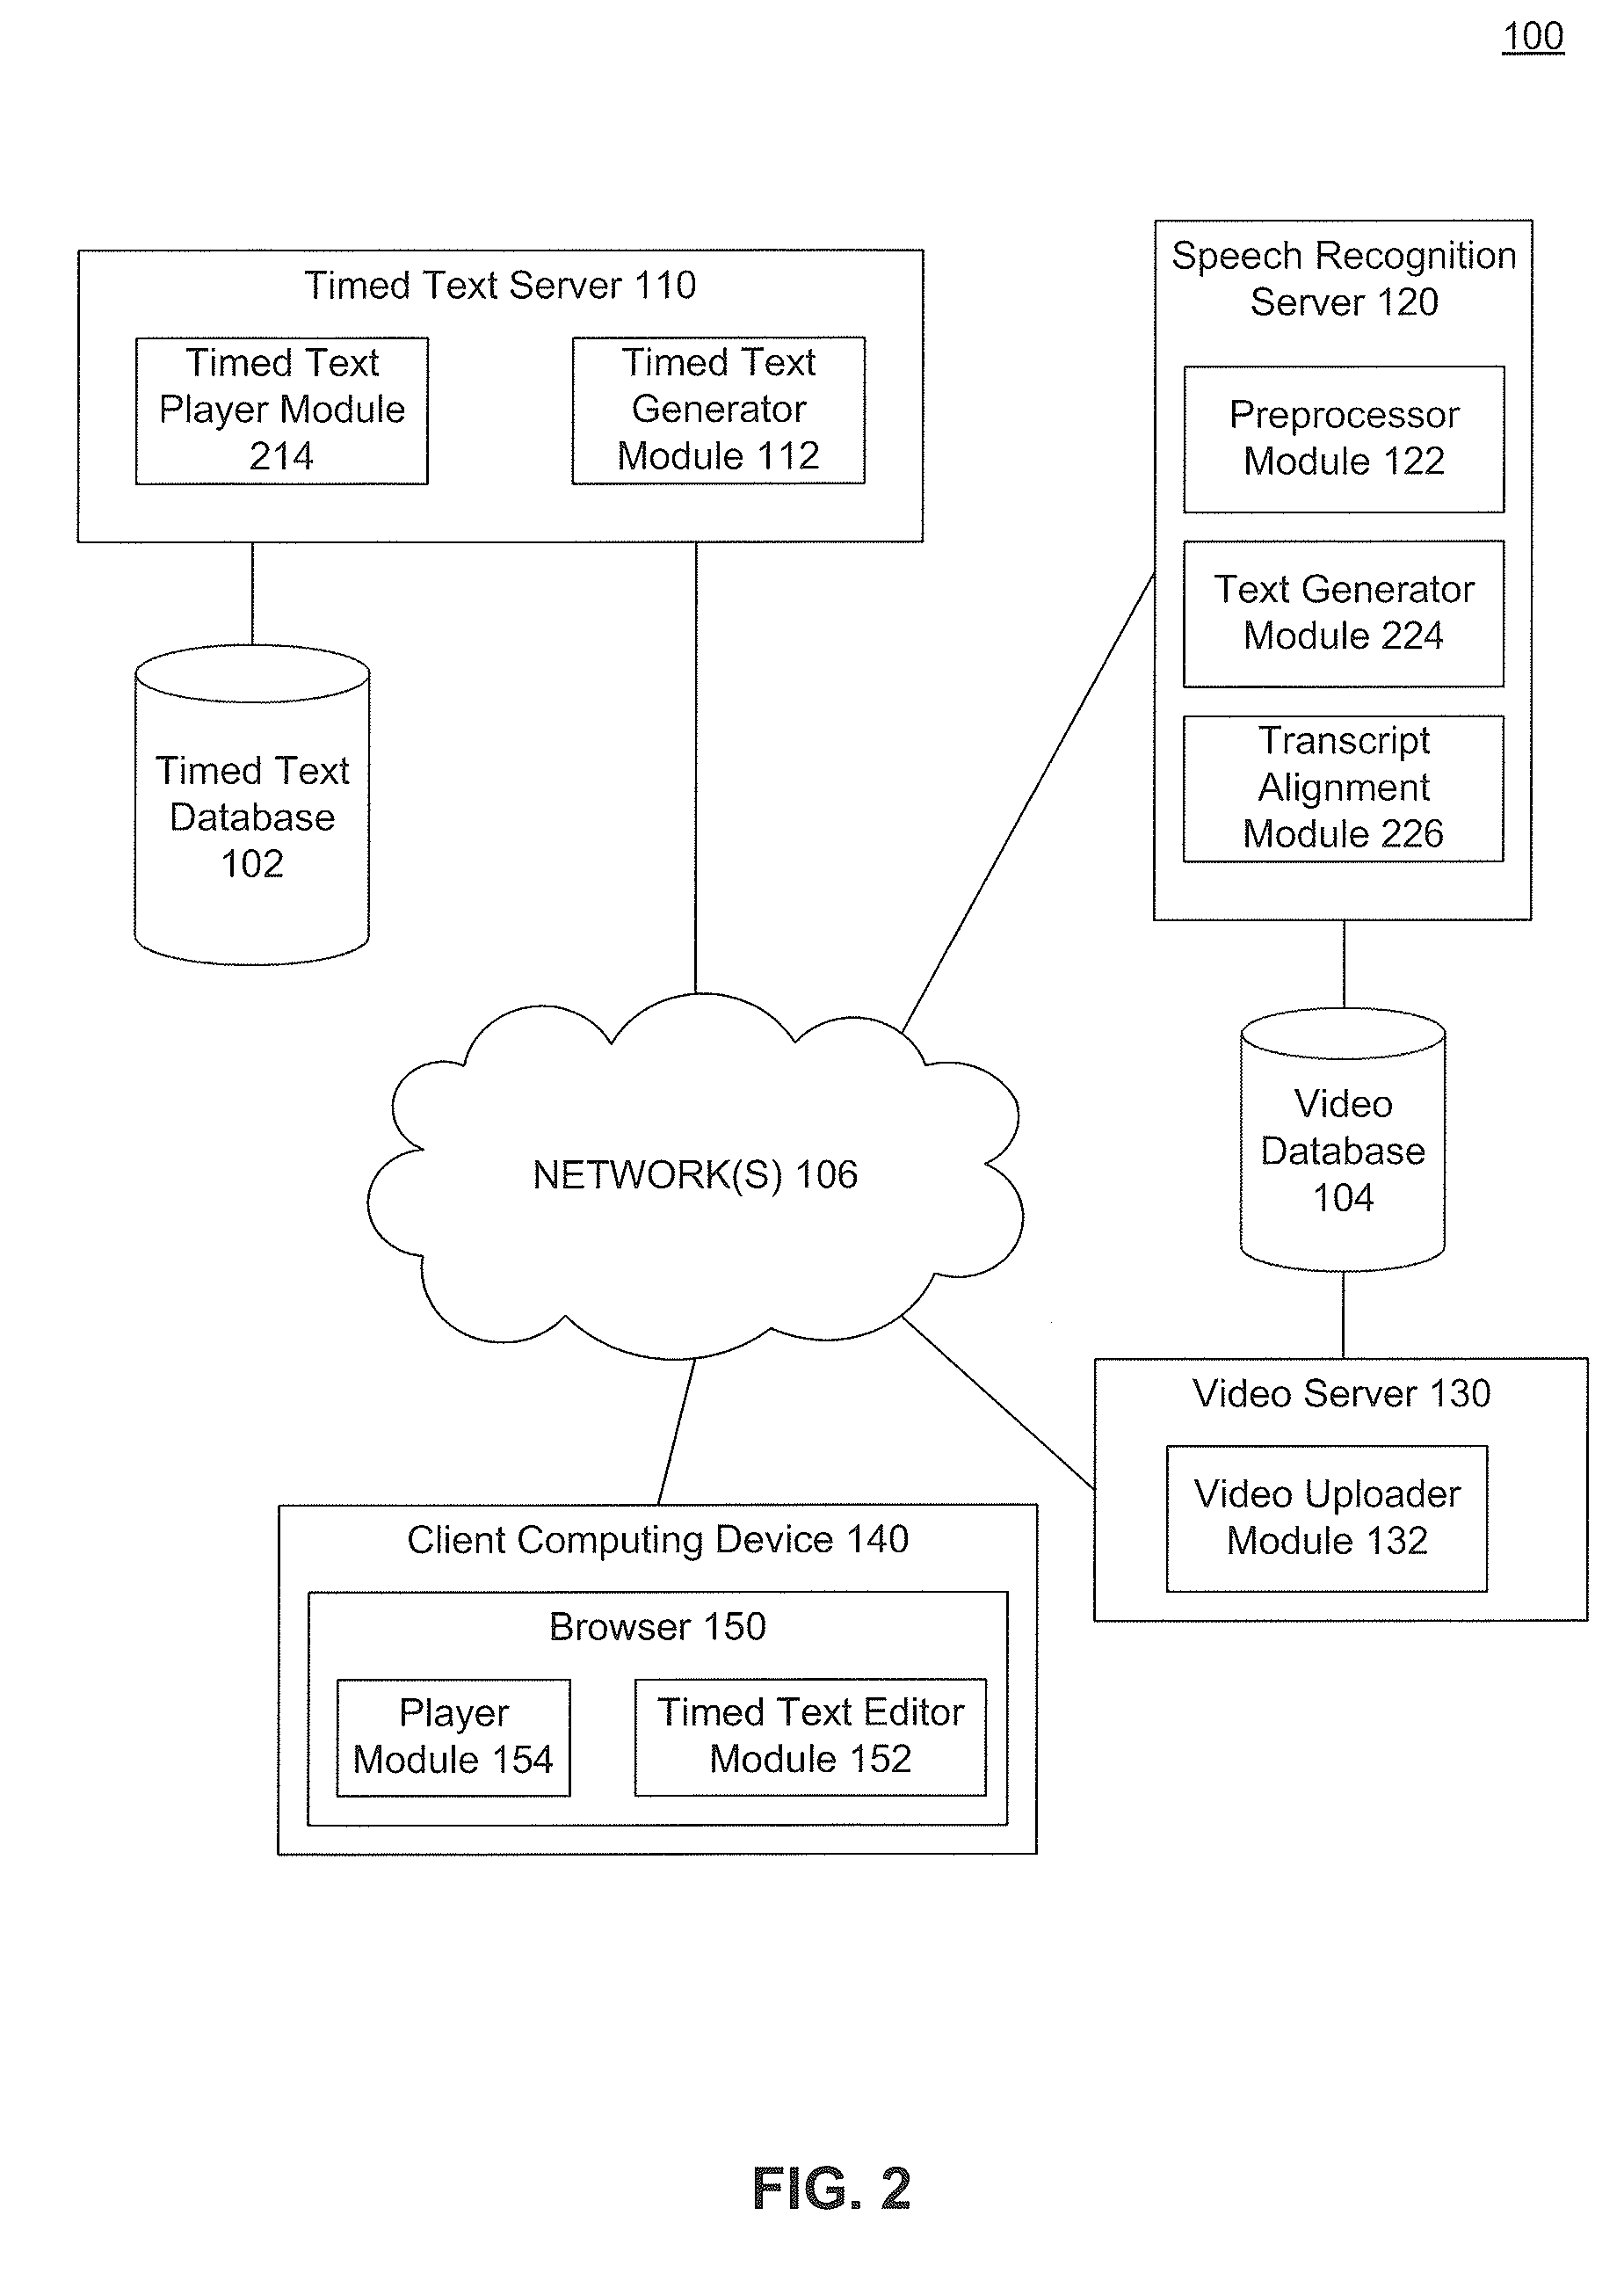 Generation of timed text using speech-to-text technology and applications thereof